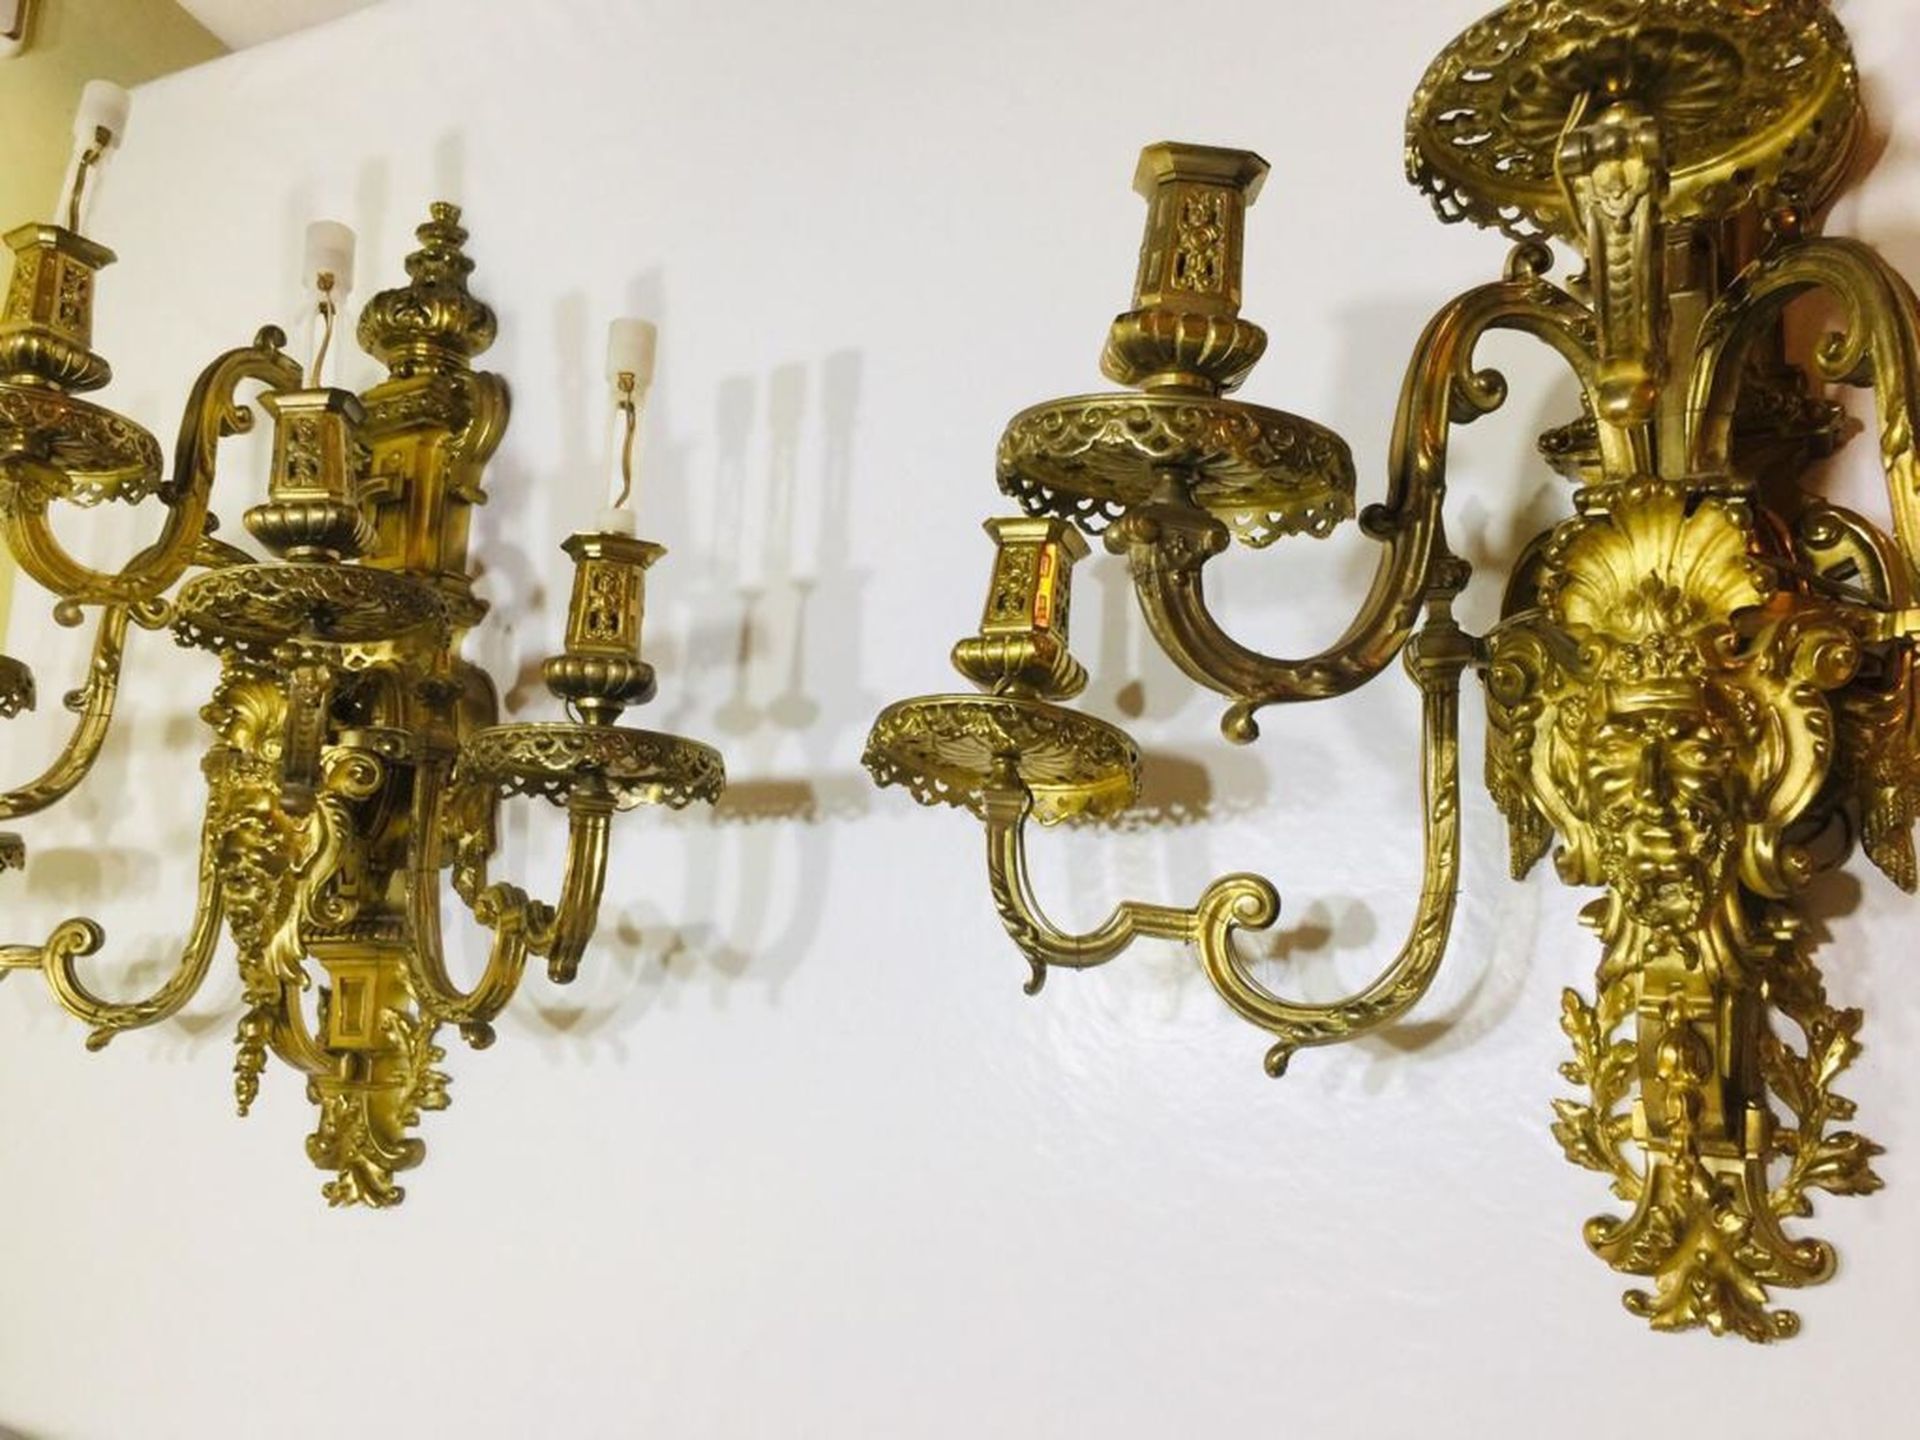 Exceptional Massive Pair of Gilt Bronze Regency Style Wall Appliques , French 19th century